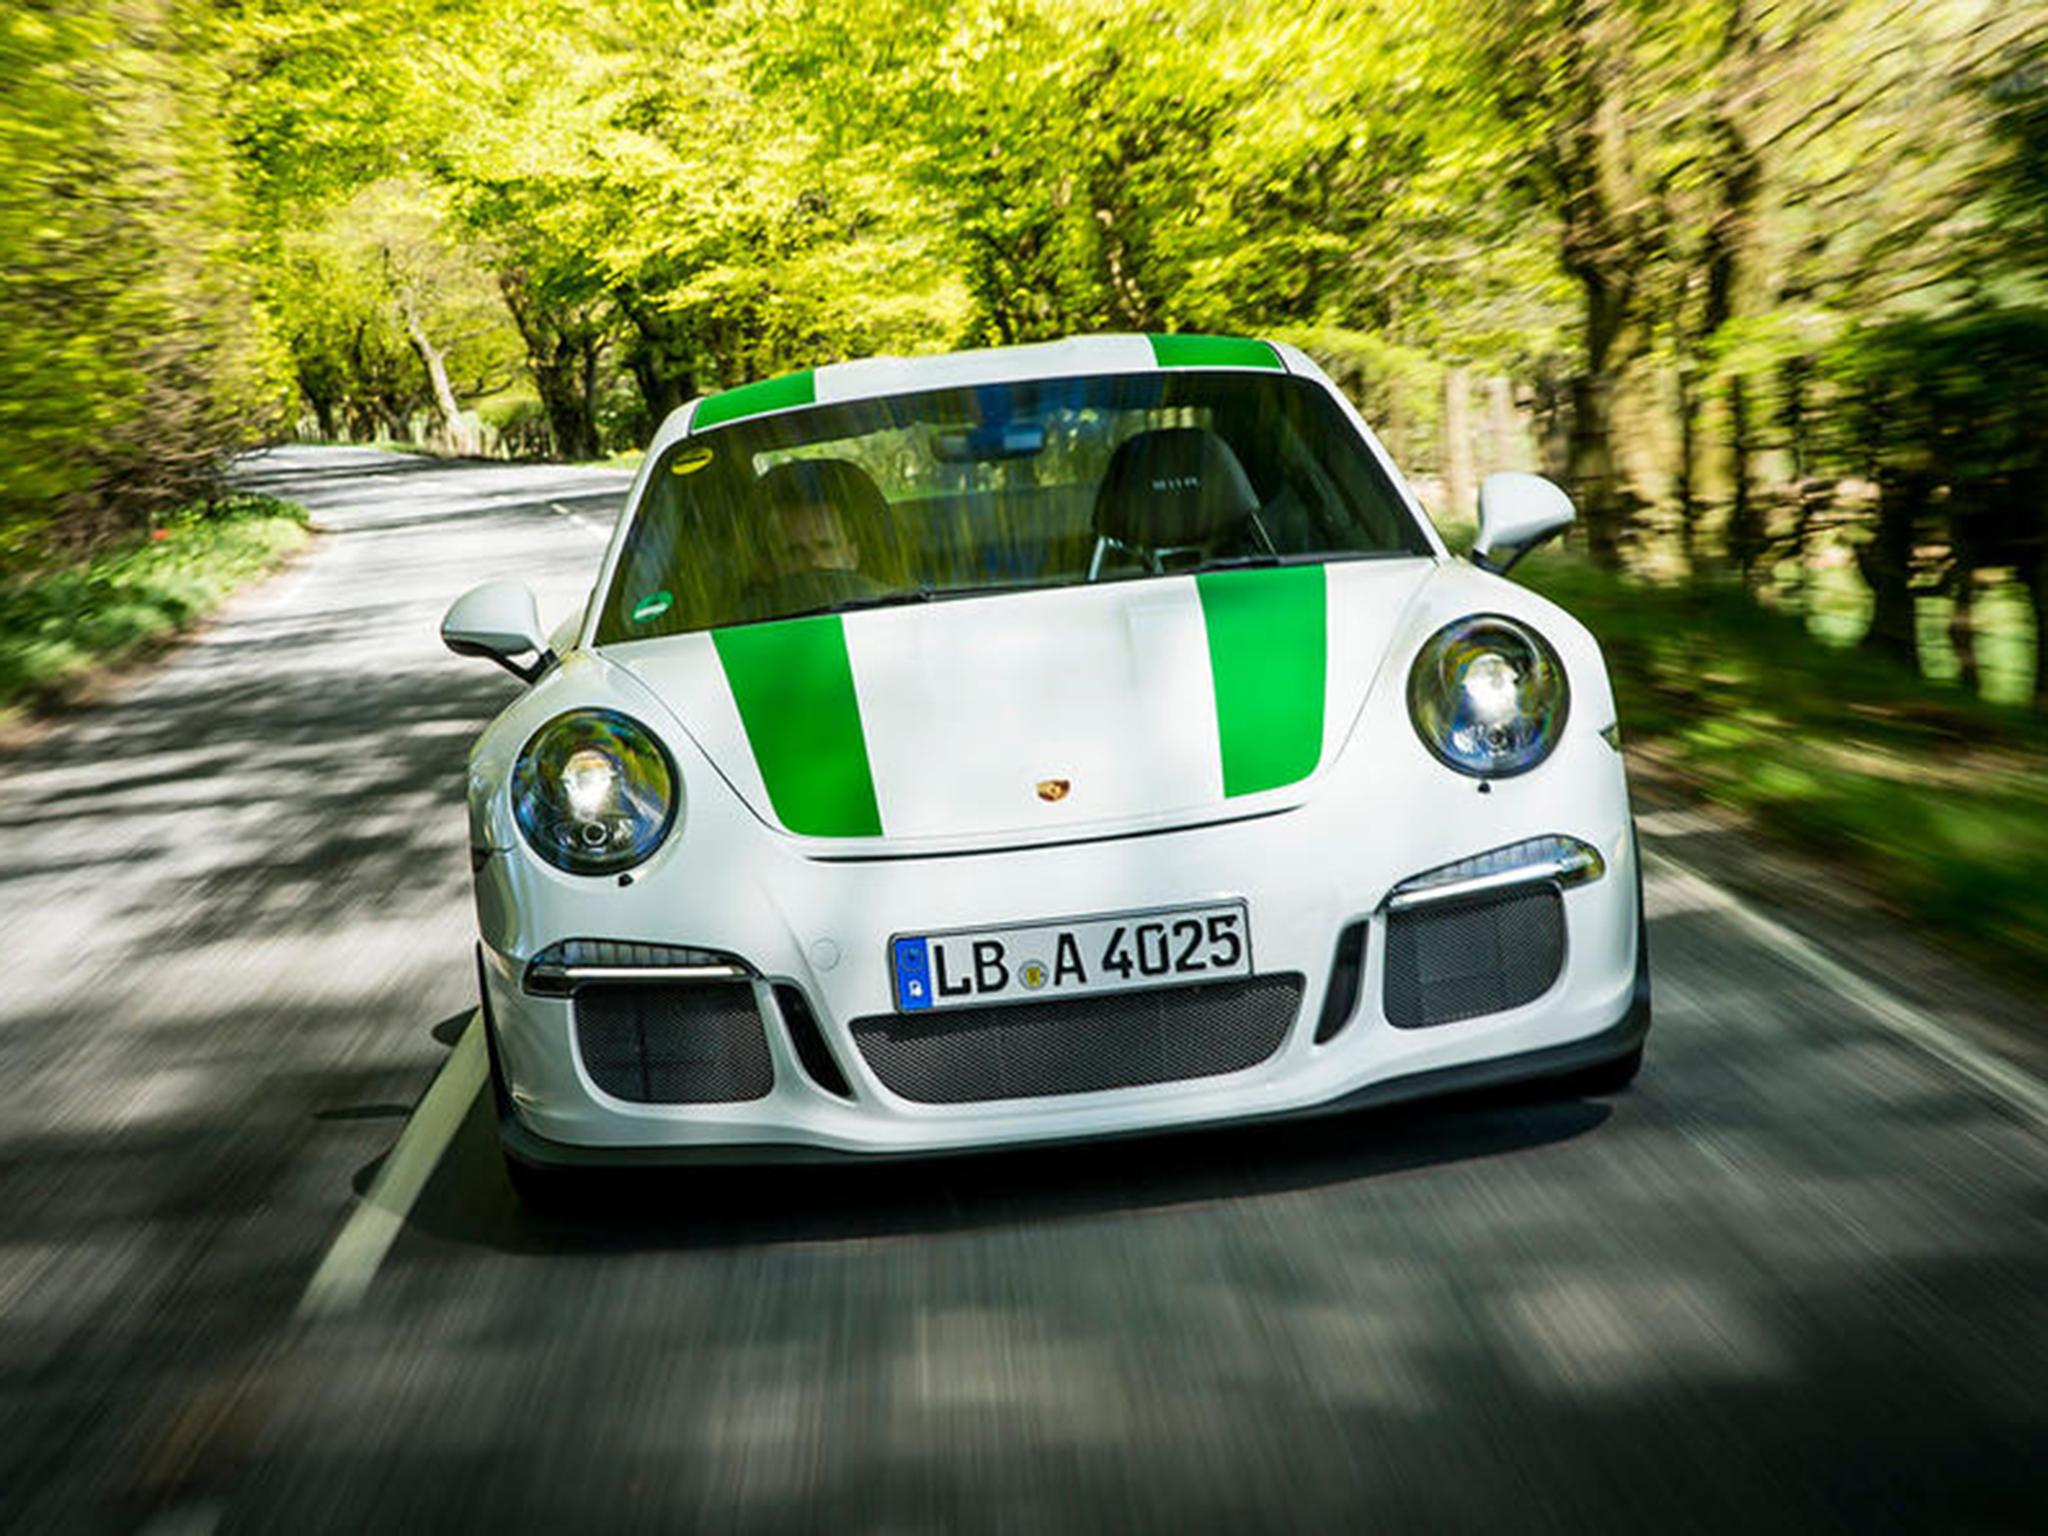 Demand is so high that it’s driving the 911 R's used price through the roof